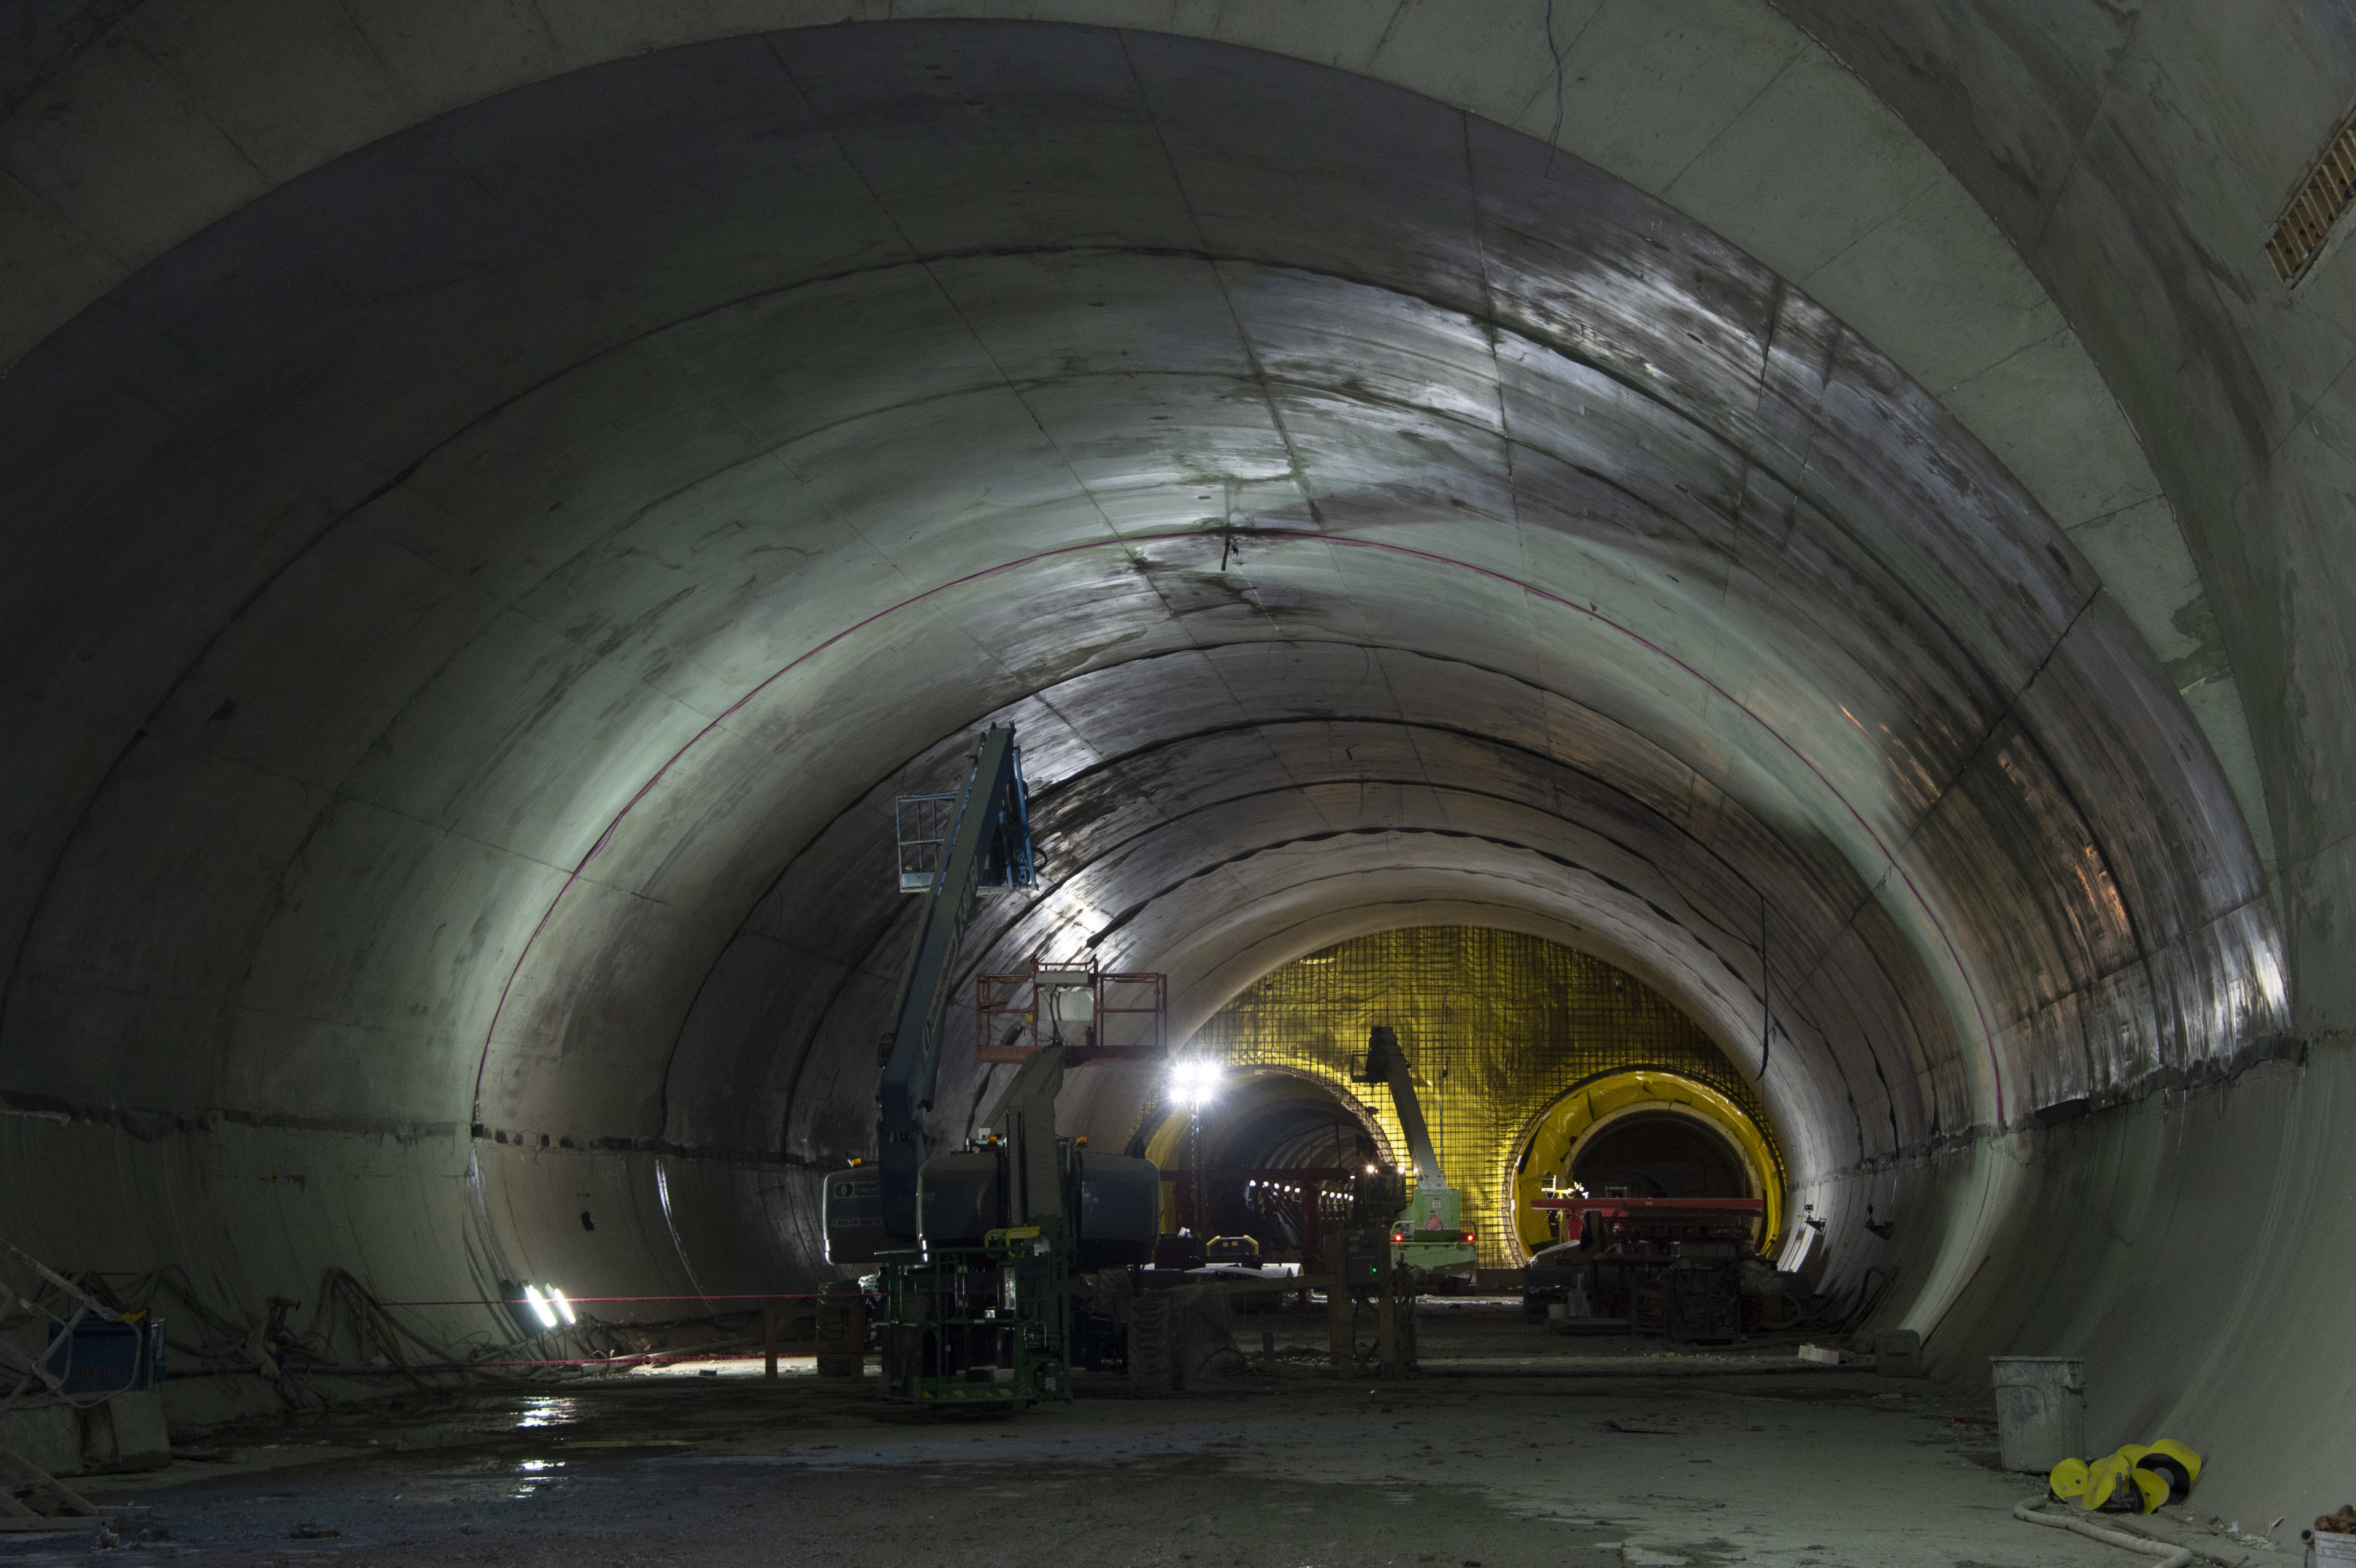 The tunnel is shown in concrete, as a cherry-picker crane reaches for the ceiling.